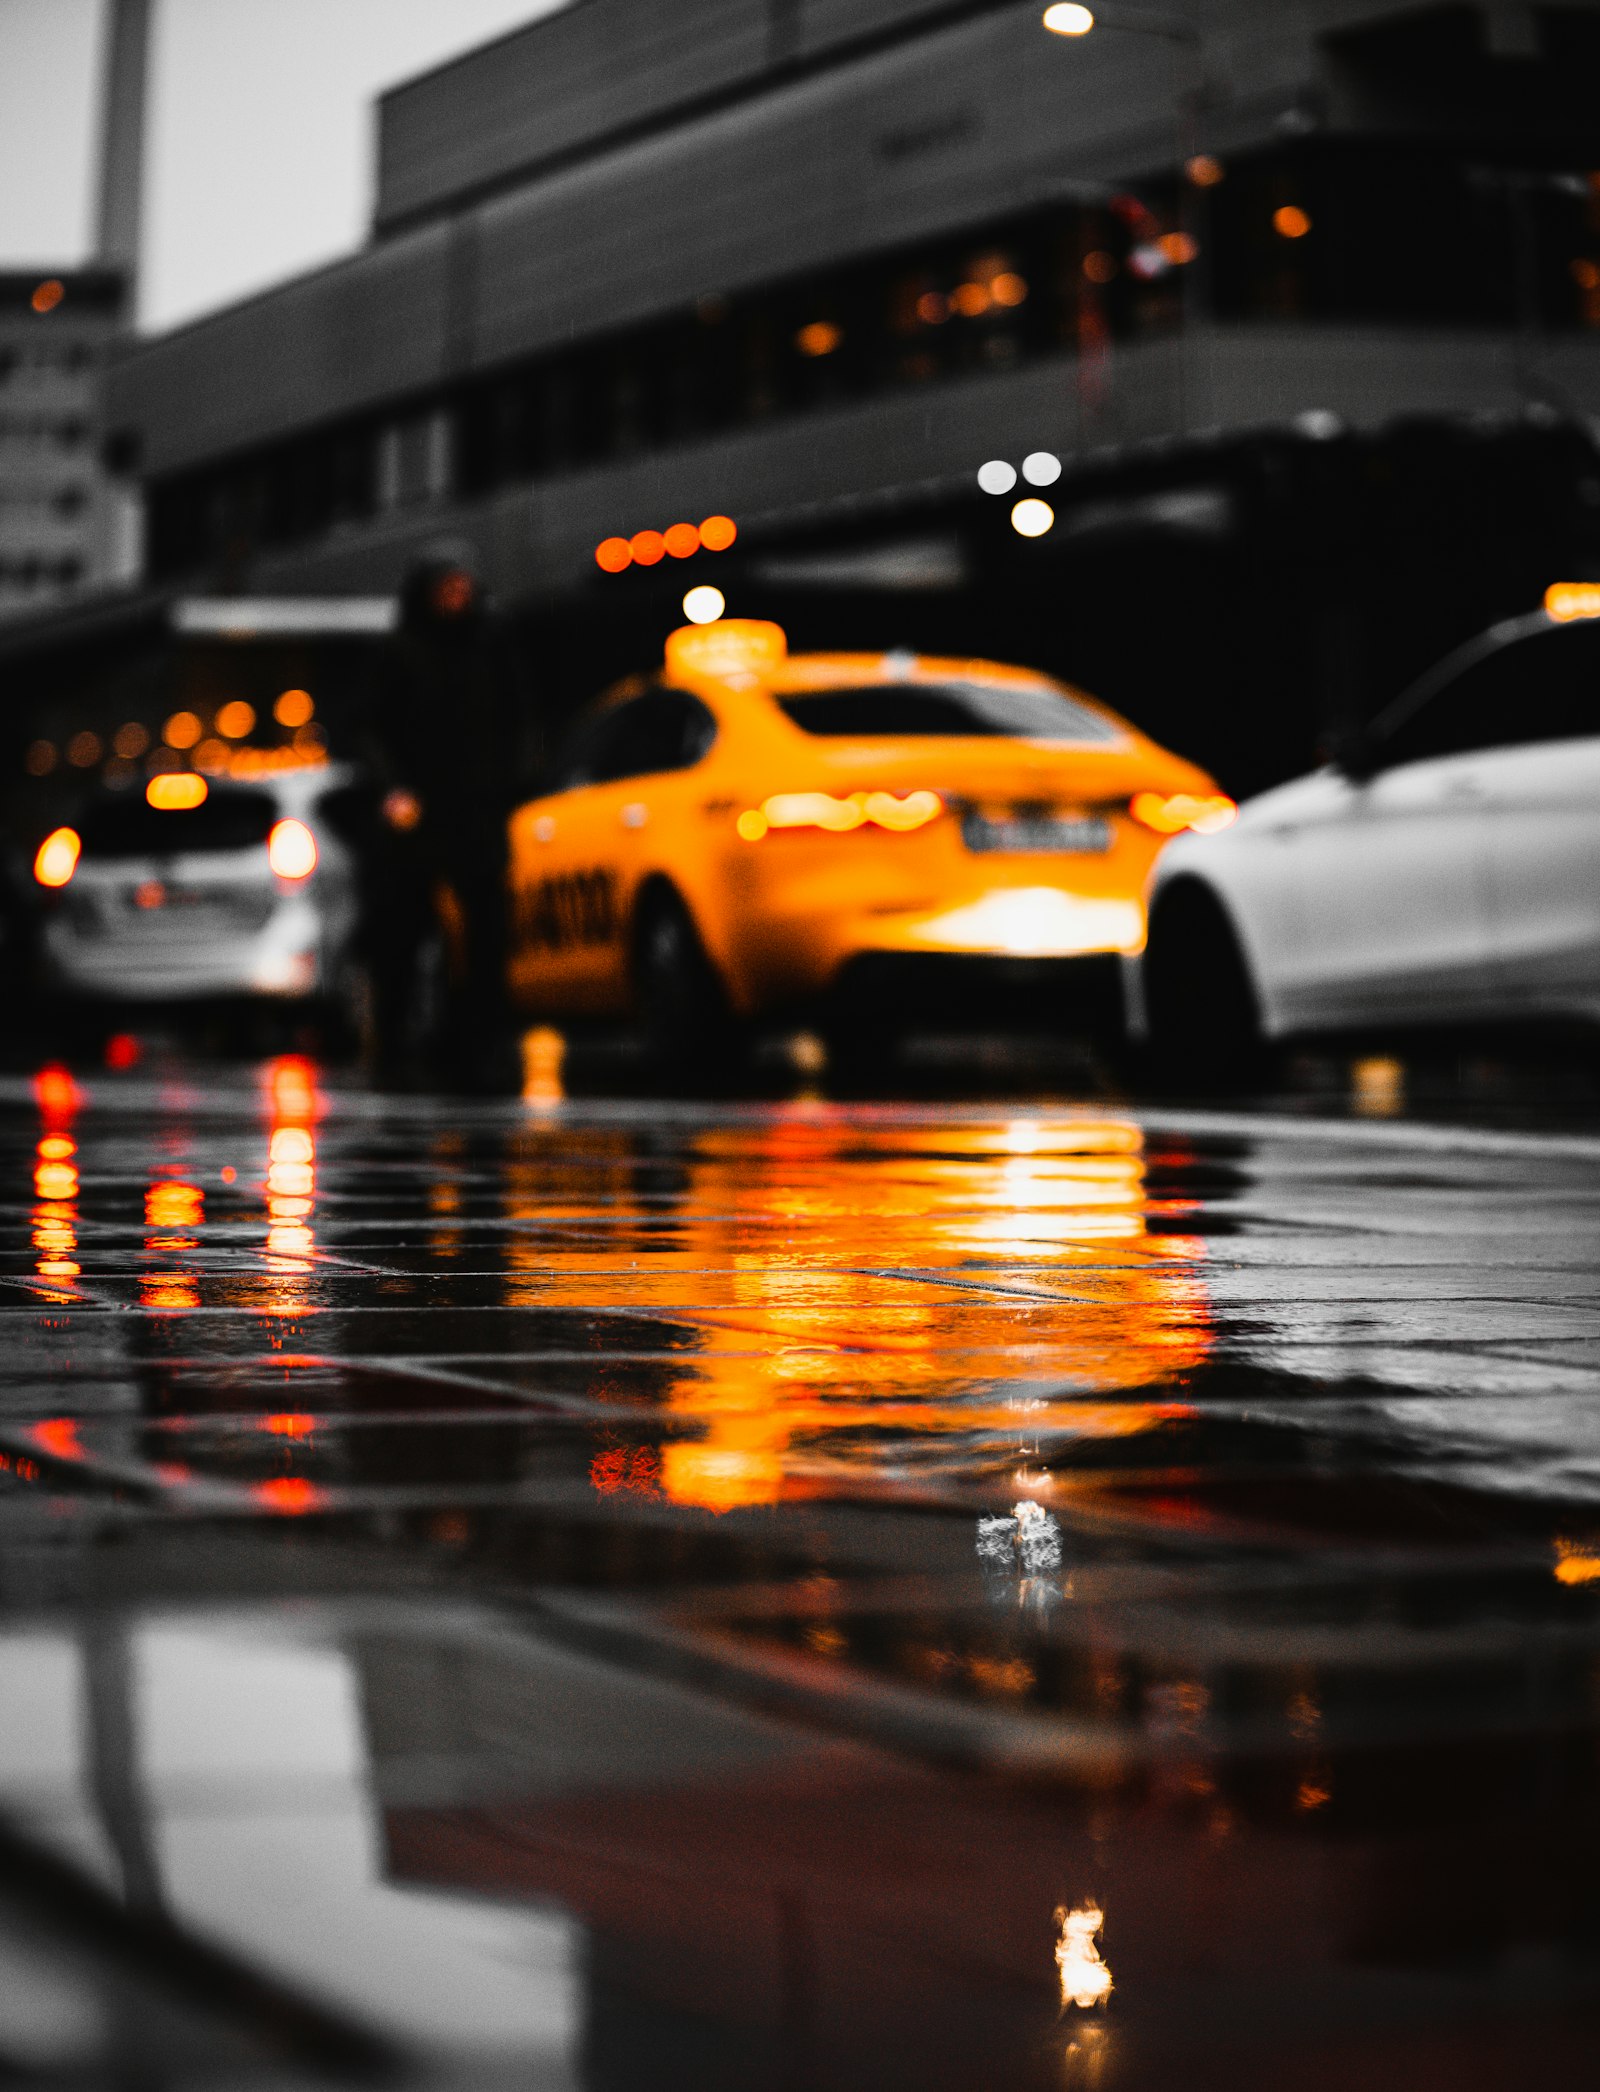 Viltrox 85mm F1.8 sample photo. Yellow taxi cab on photography